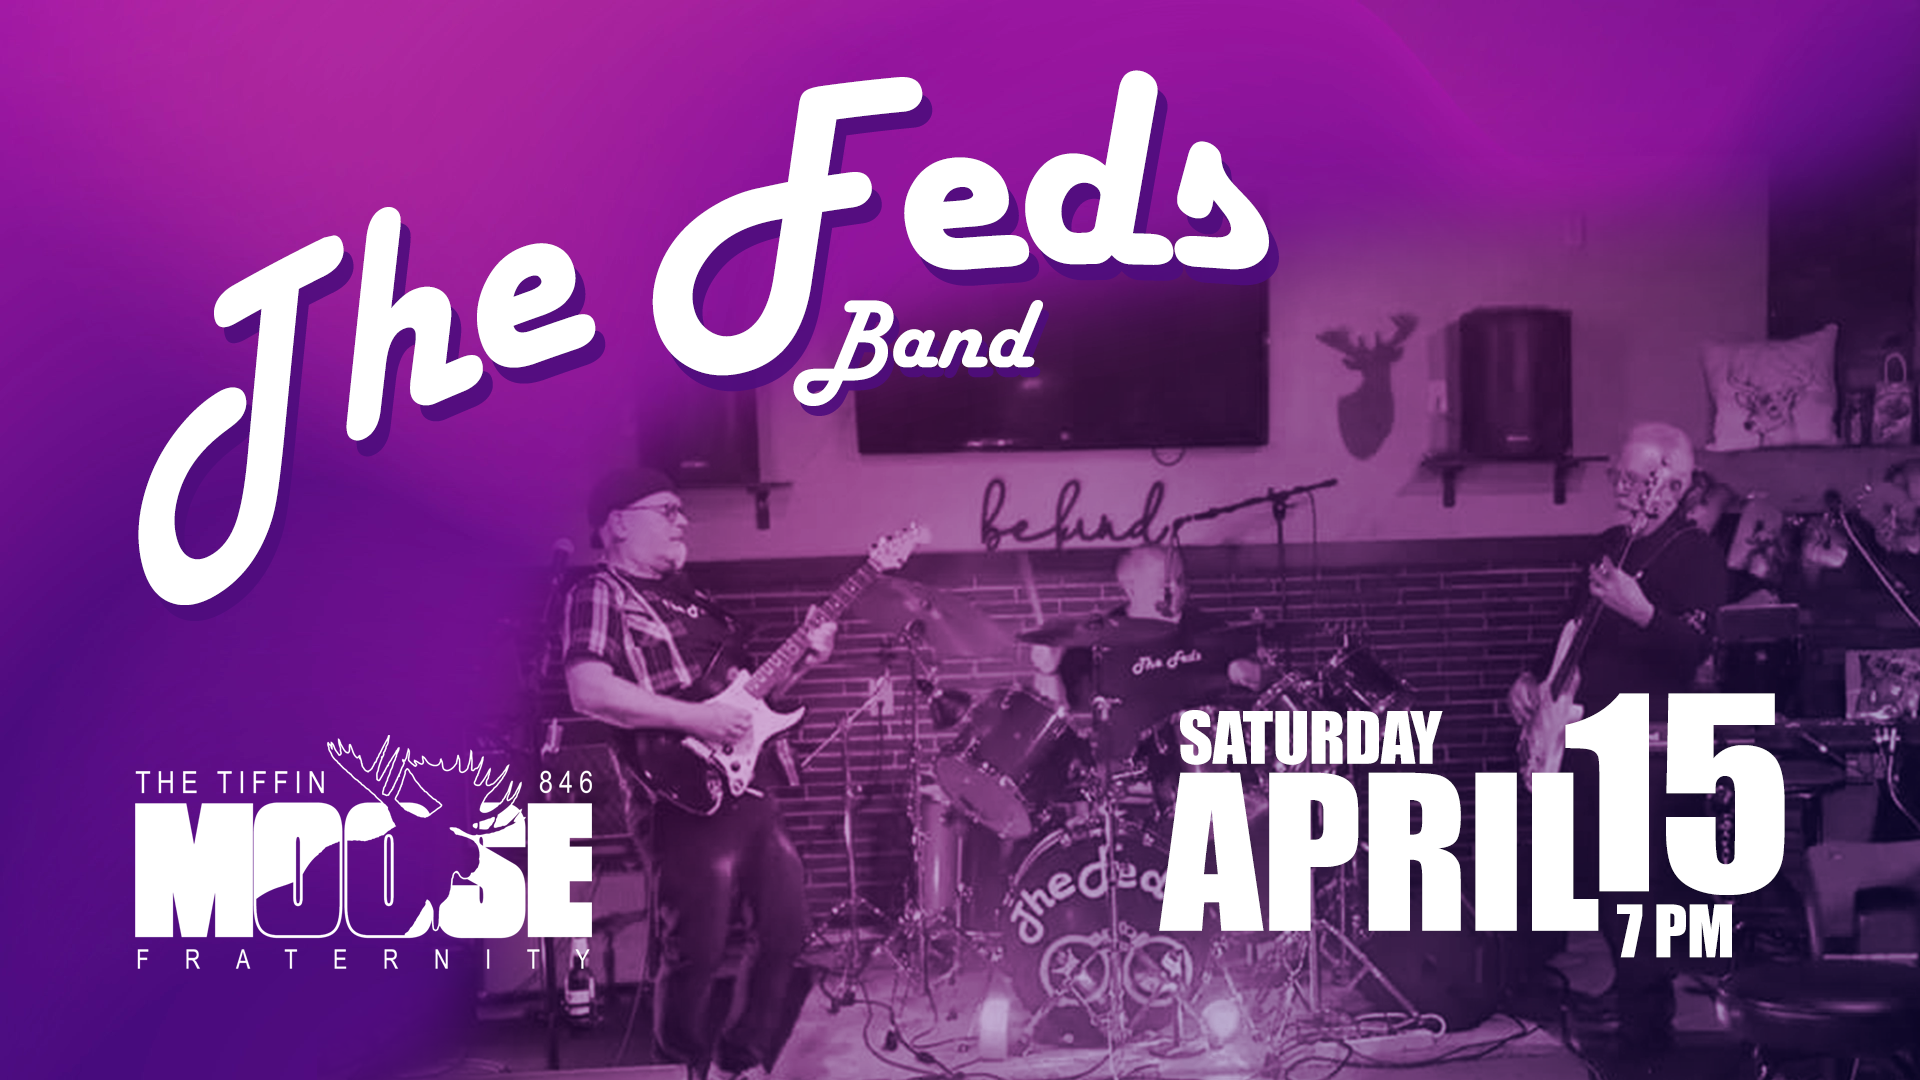 The Feds Band at The Tiffin Moose